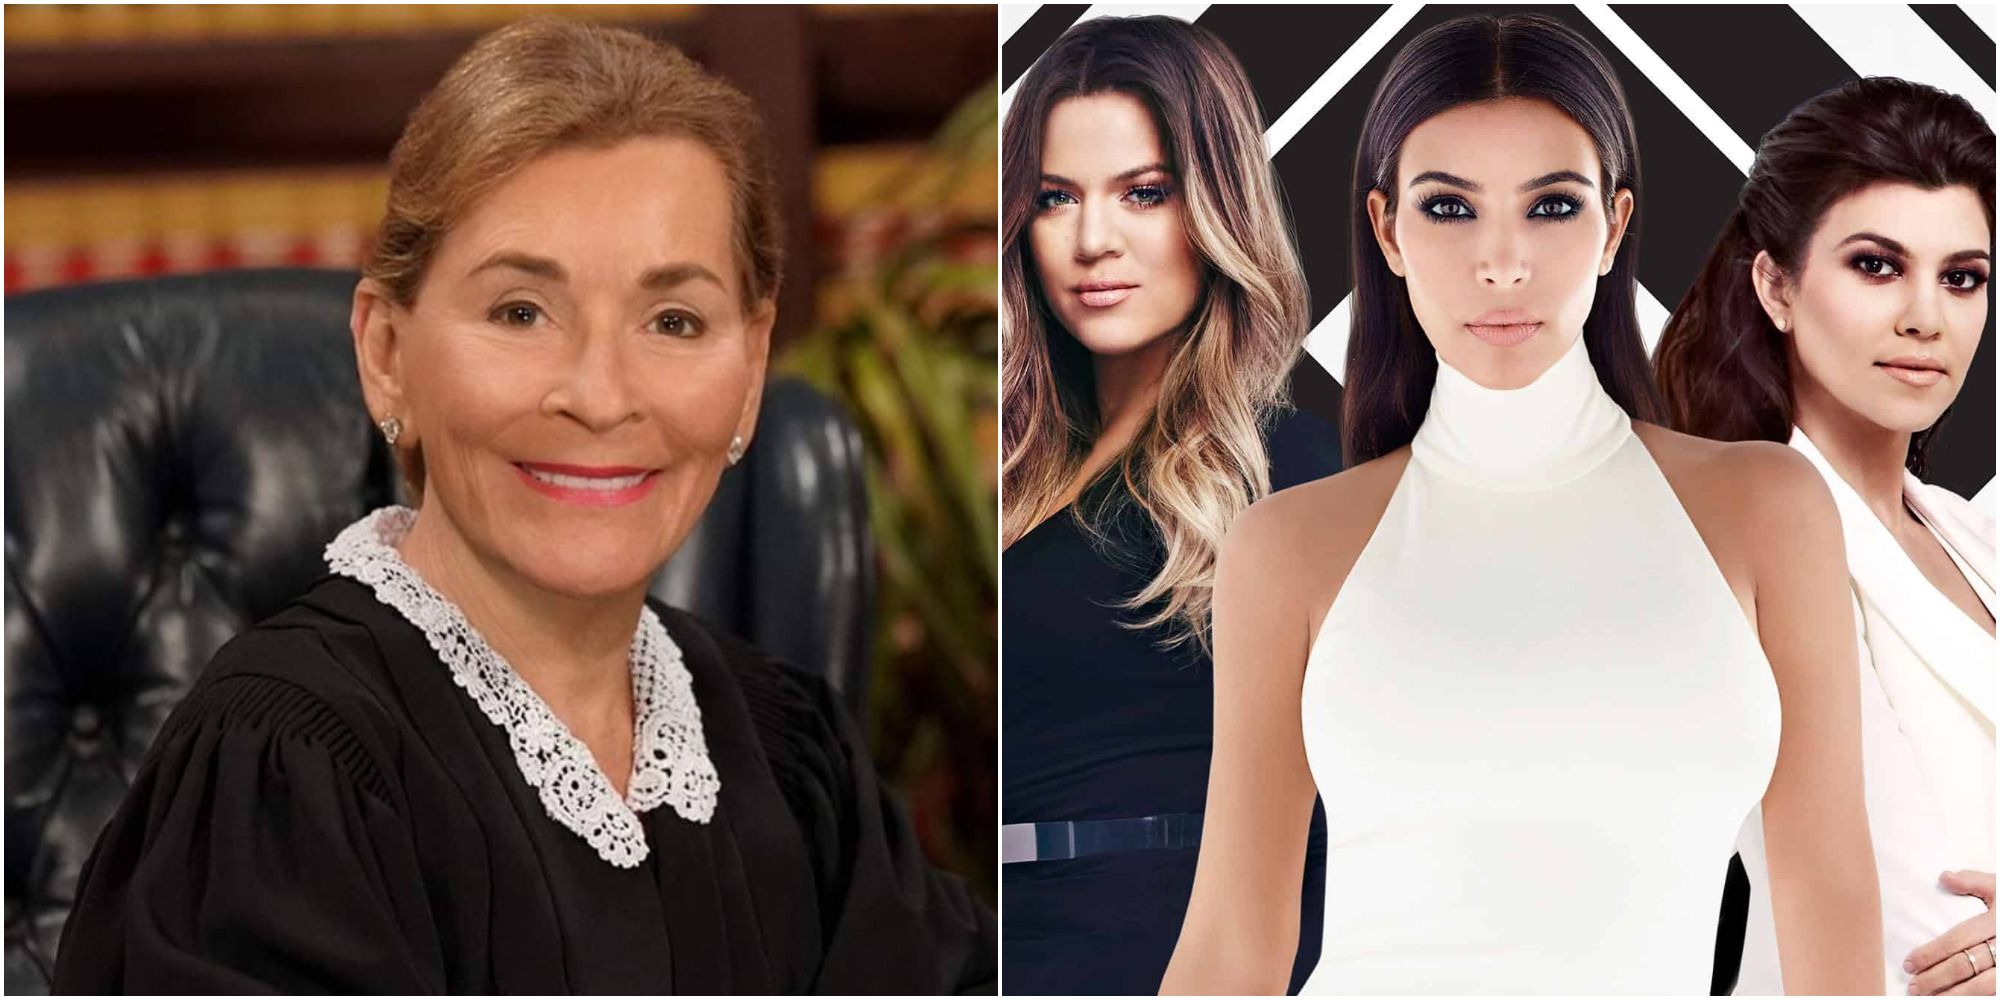 Judge Judy And Keeping Up With The Kardashians